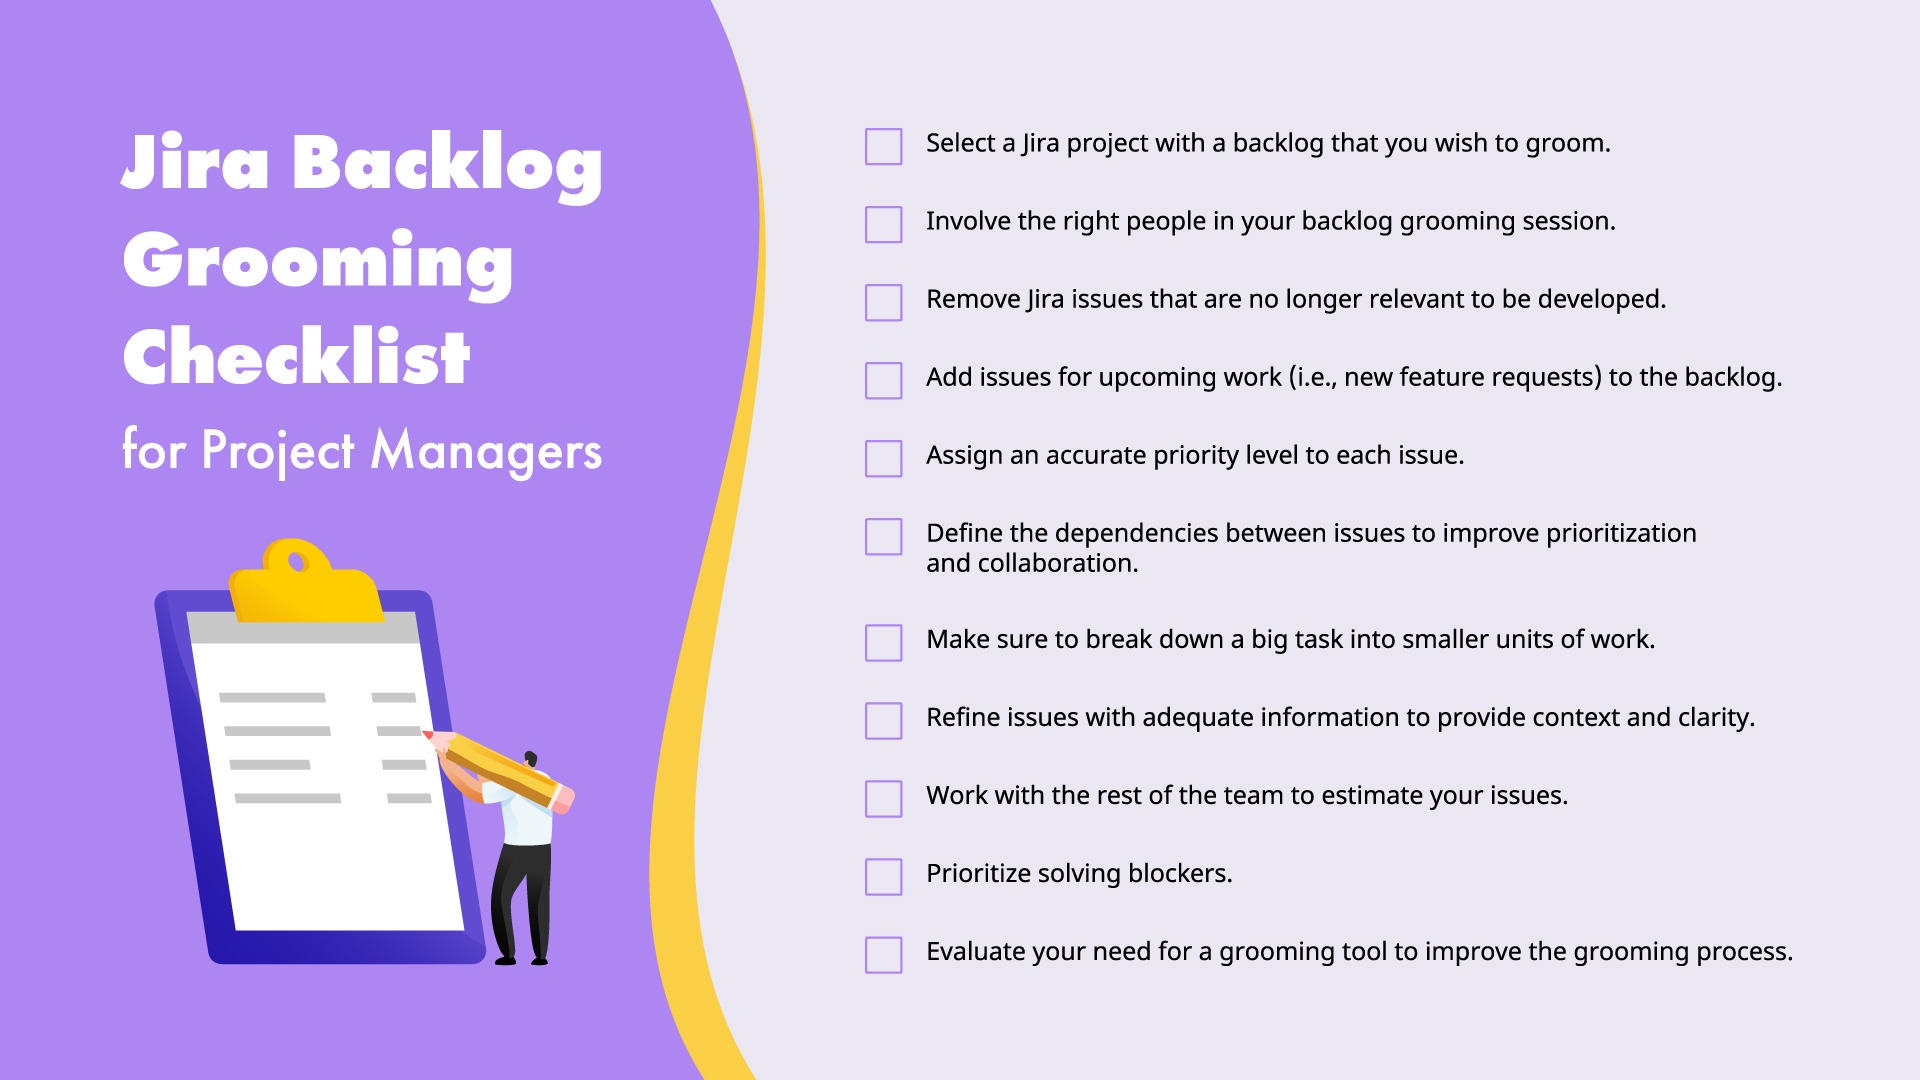 Project Manager’s Checklist for Successful Jira Backlog Grooming